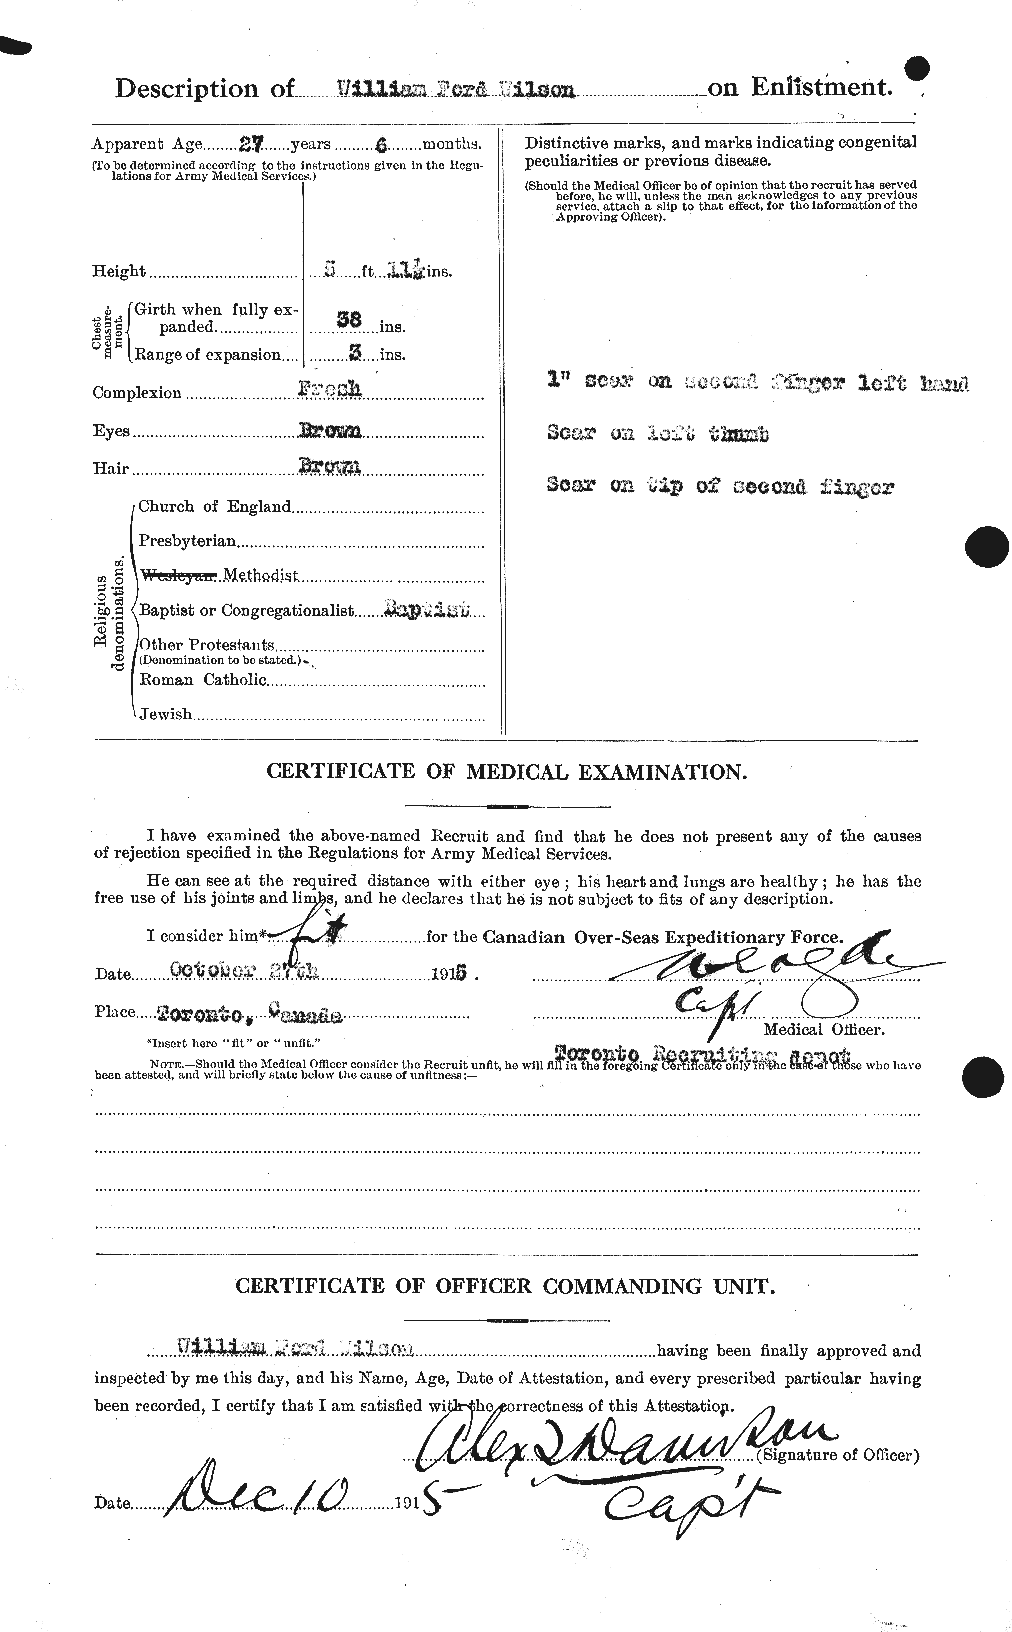 Personnel Records of the First World War - CEF 681989b